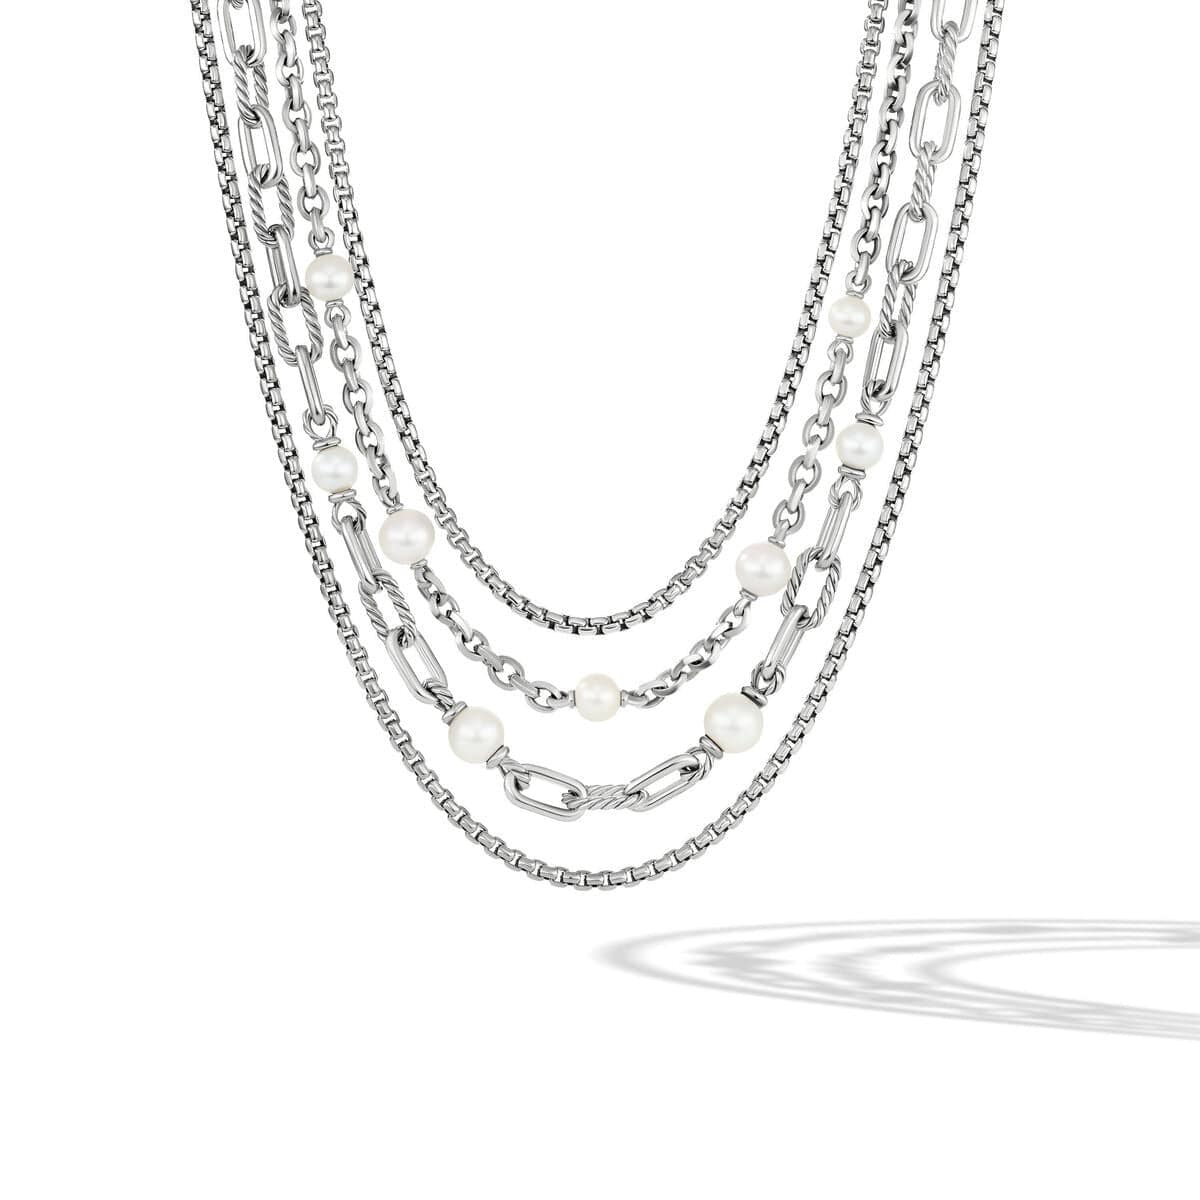 DY Madison® Pearl Multi Row Chain Necklace in Sterling Silver